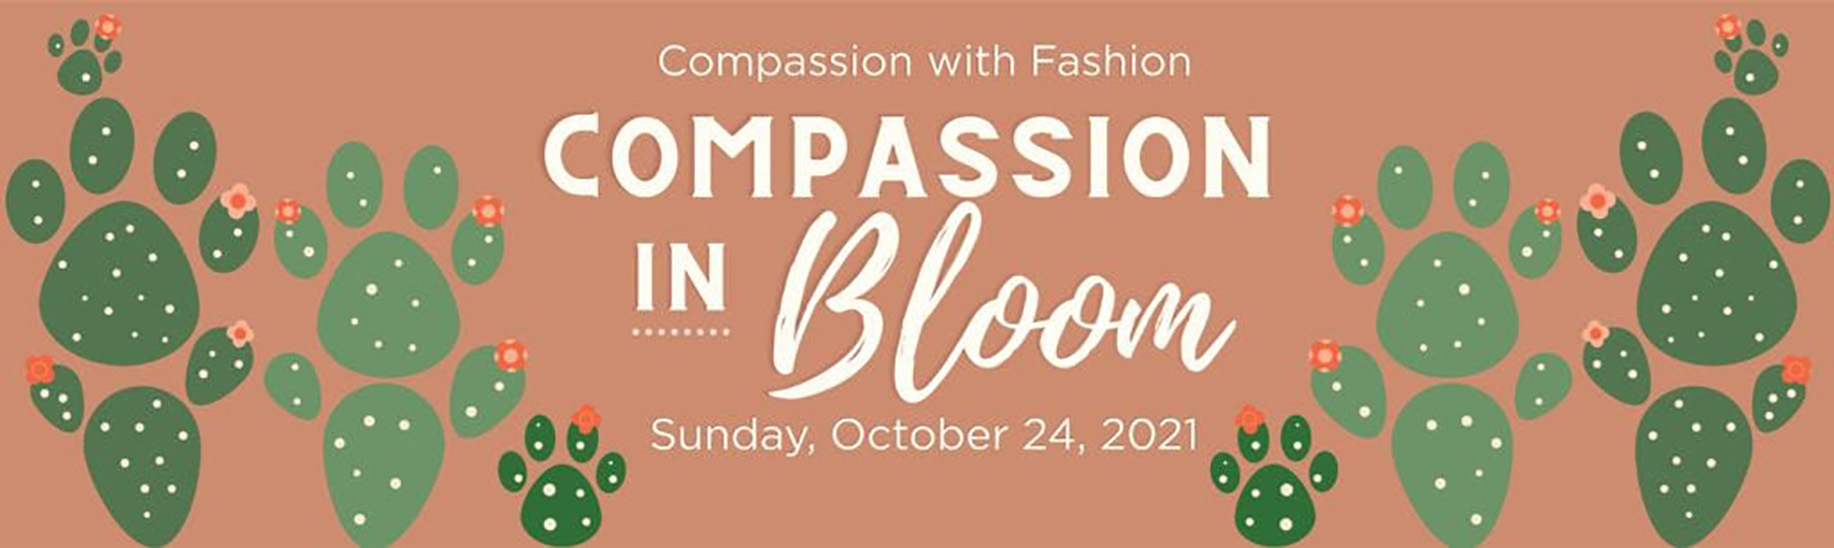 Compassion in Bloom promotion banner